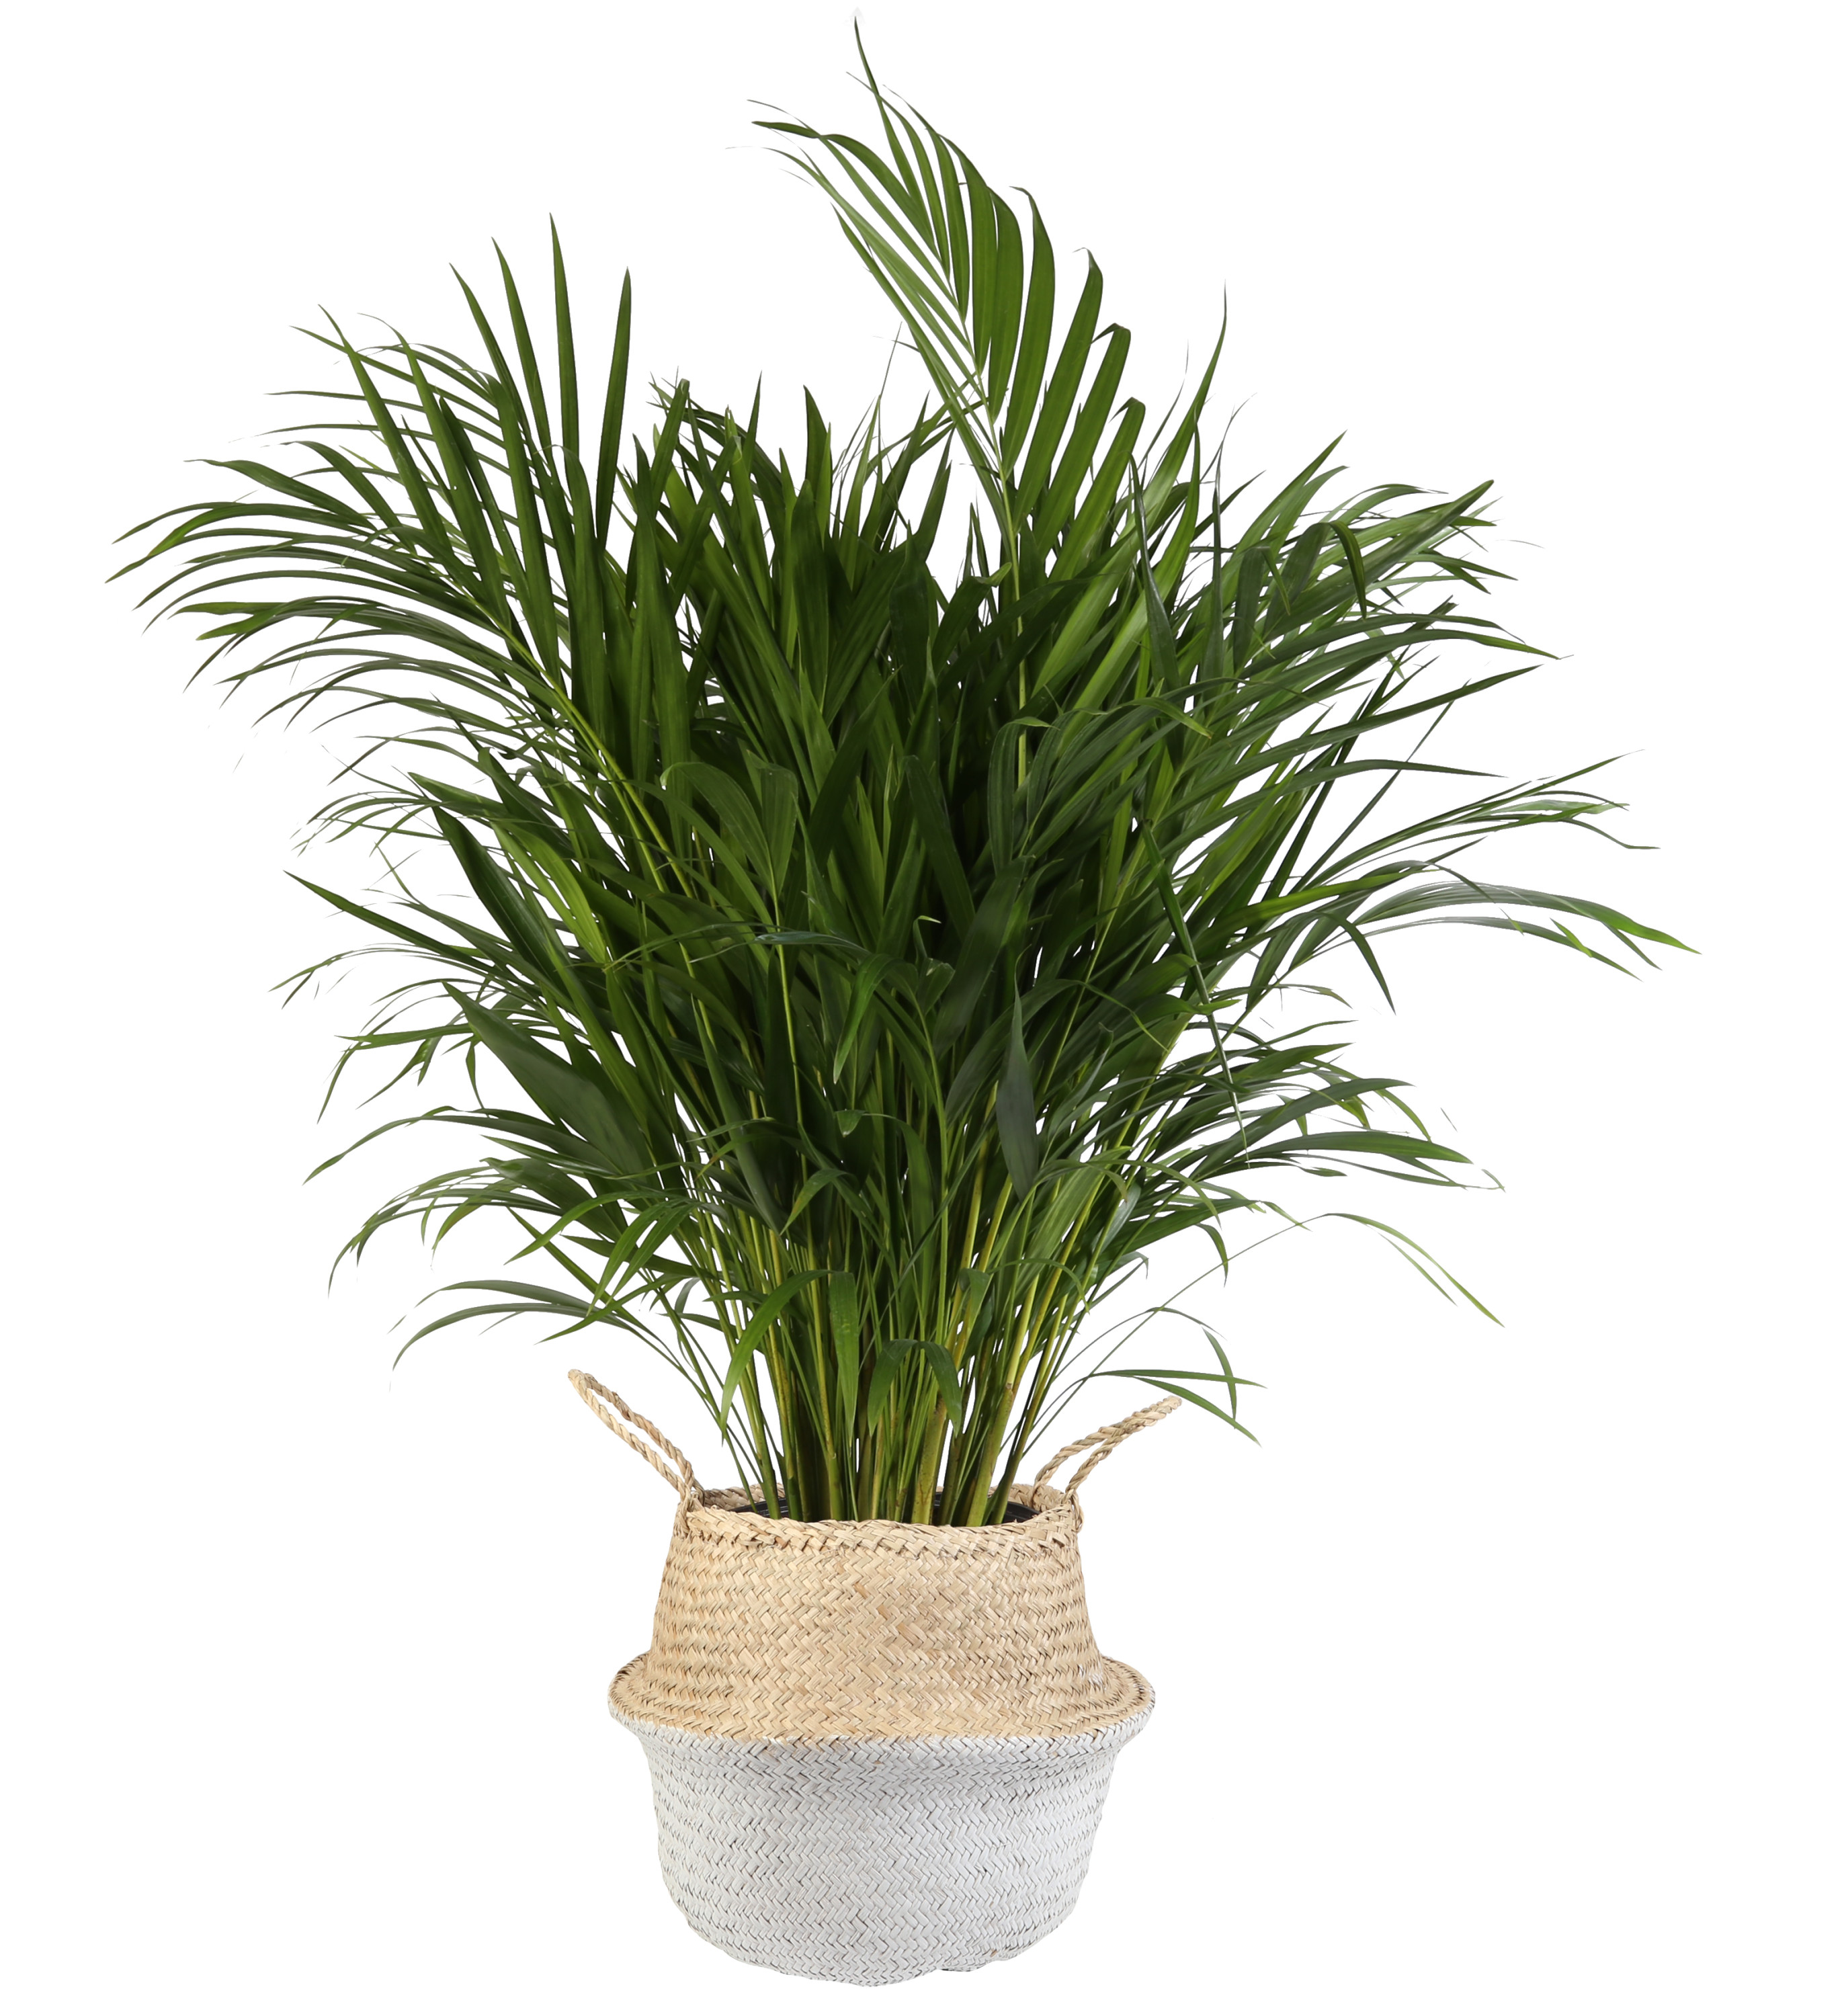 Live Indoor 36in. Tall Green Areca Palm; Bright, Indirect Sunlight Plant in 10in. Seagrass Planter - image 1 of 9